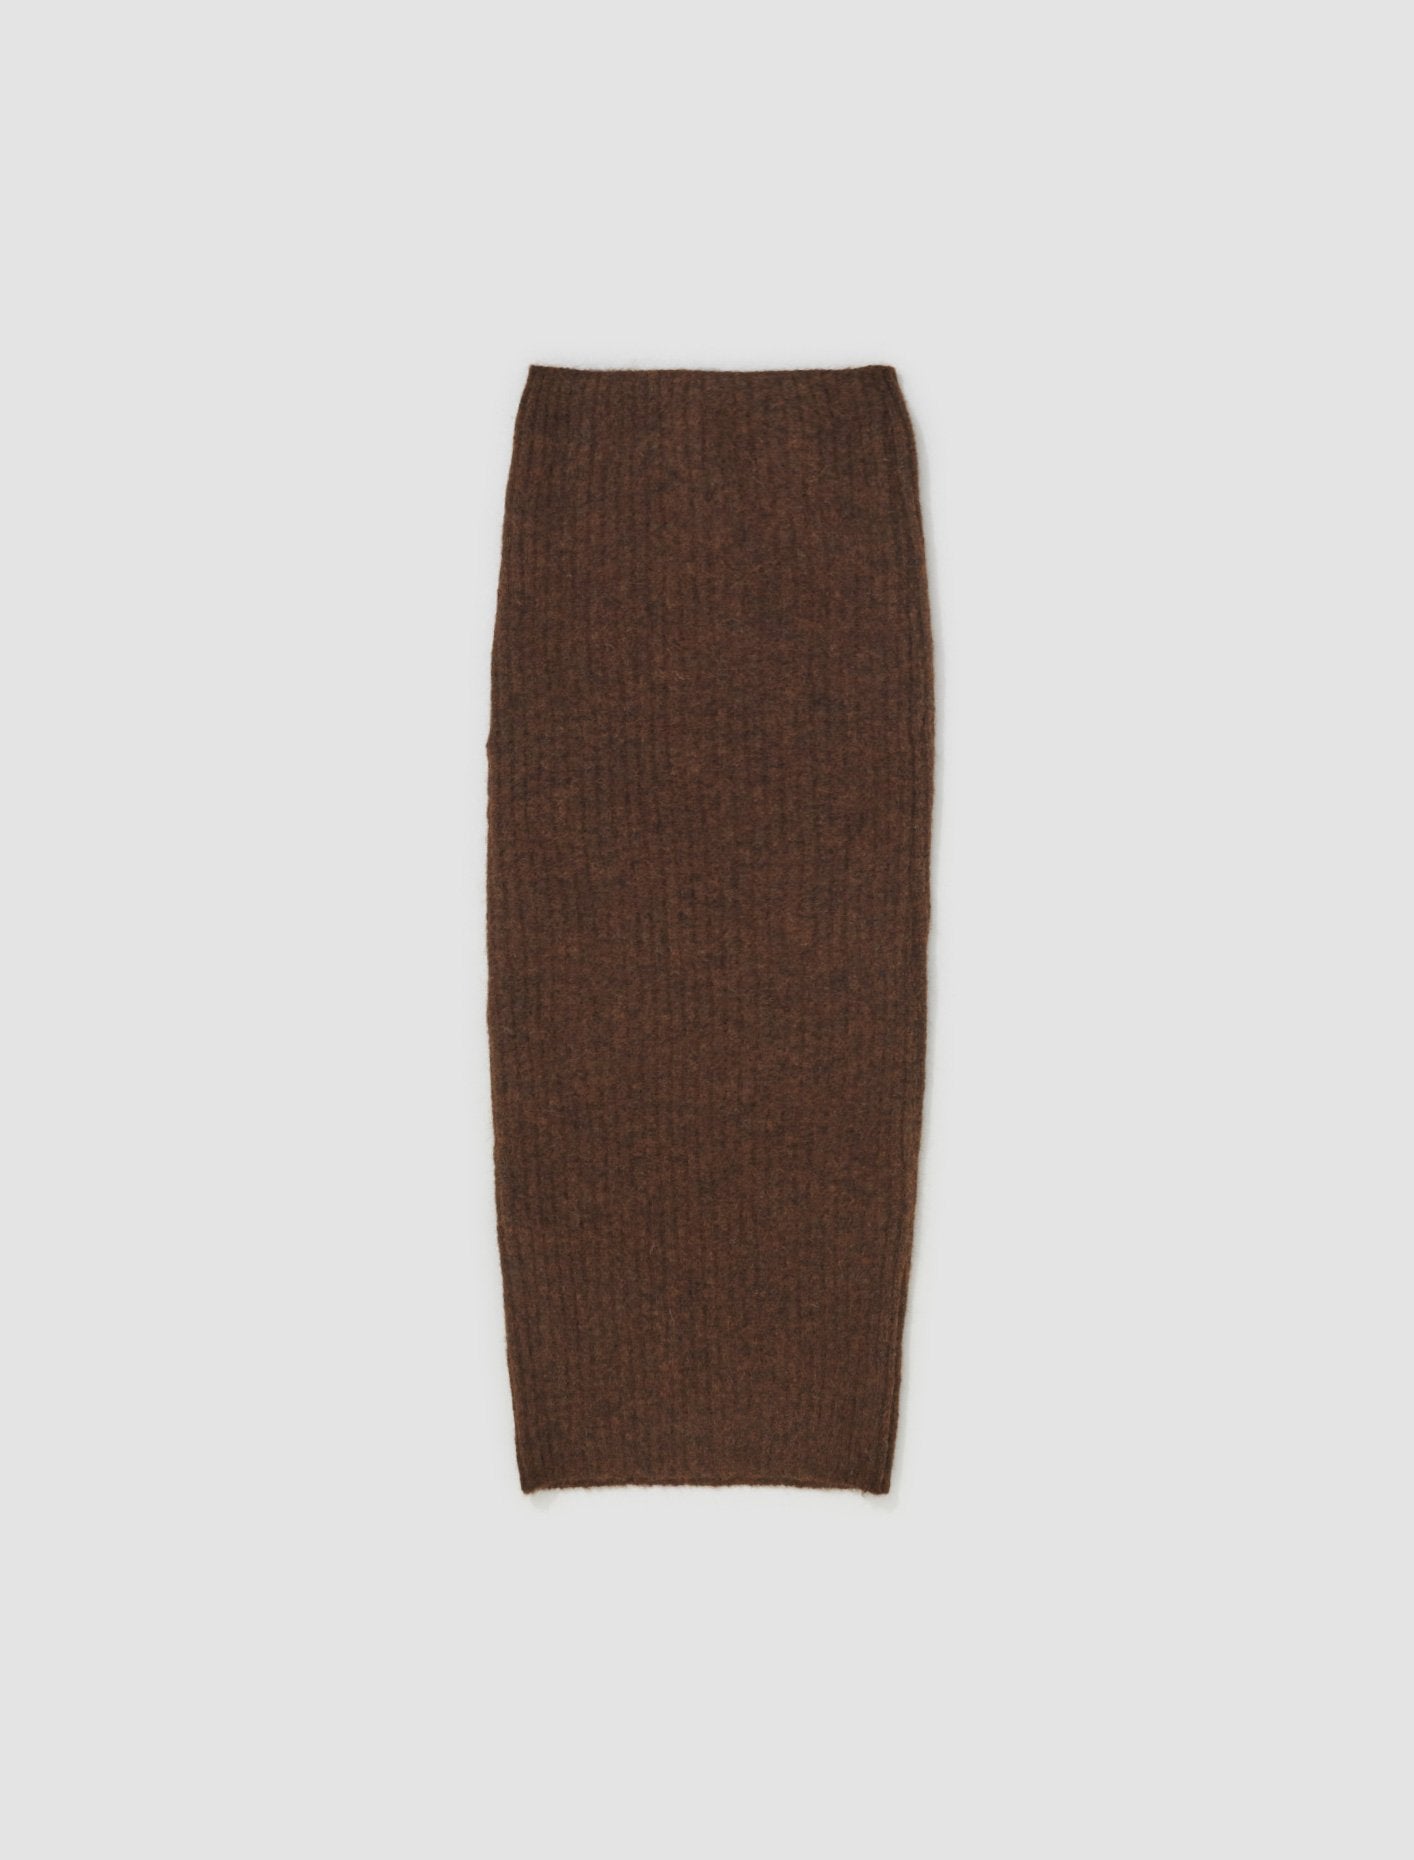 Siracuza Skirt in Brown